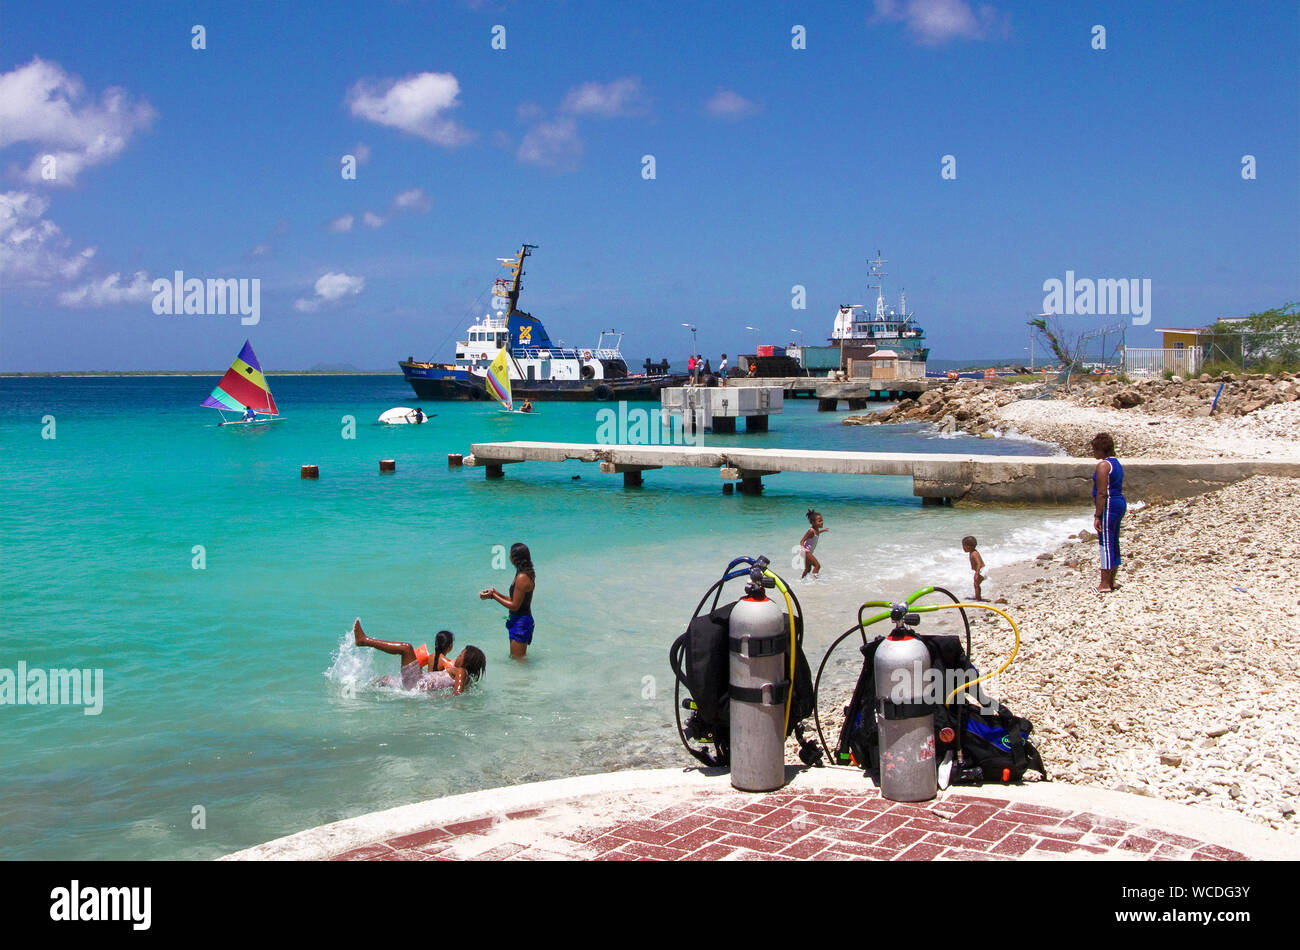 Diving cylinders at the baech, surfer on the sea, Watersport paradise Bonaire, Netherland Antilles Stock Photo